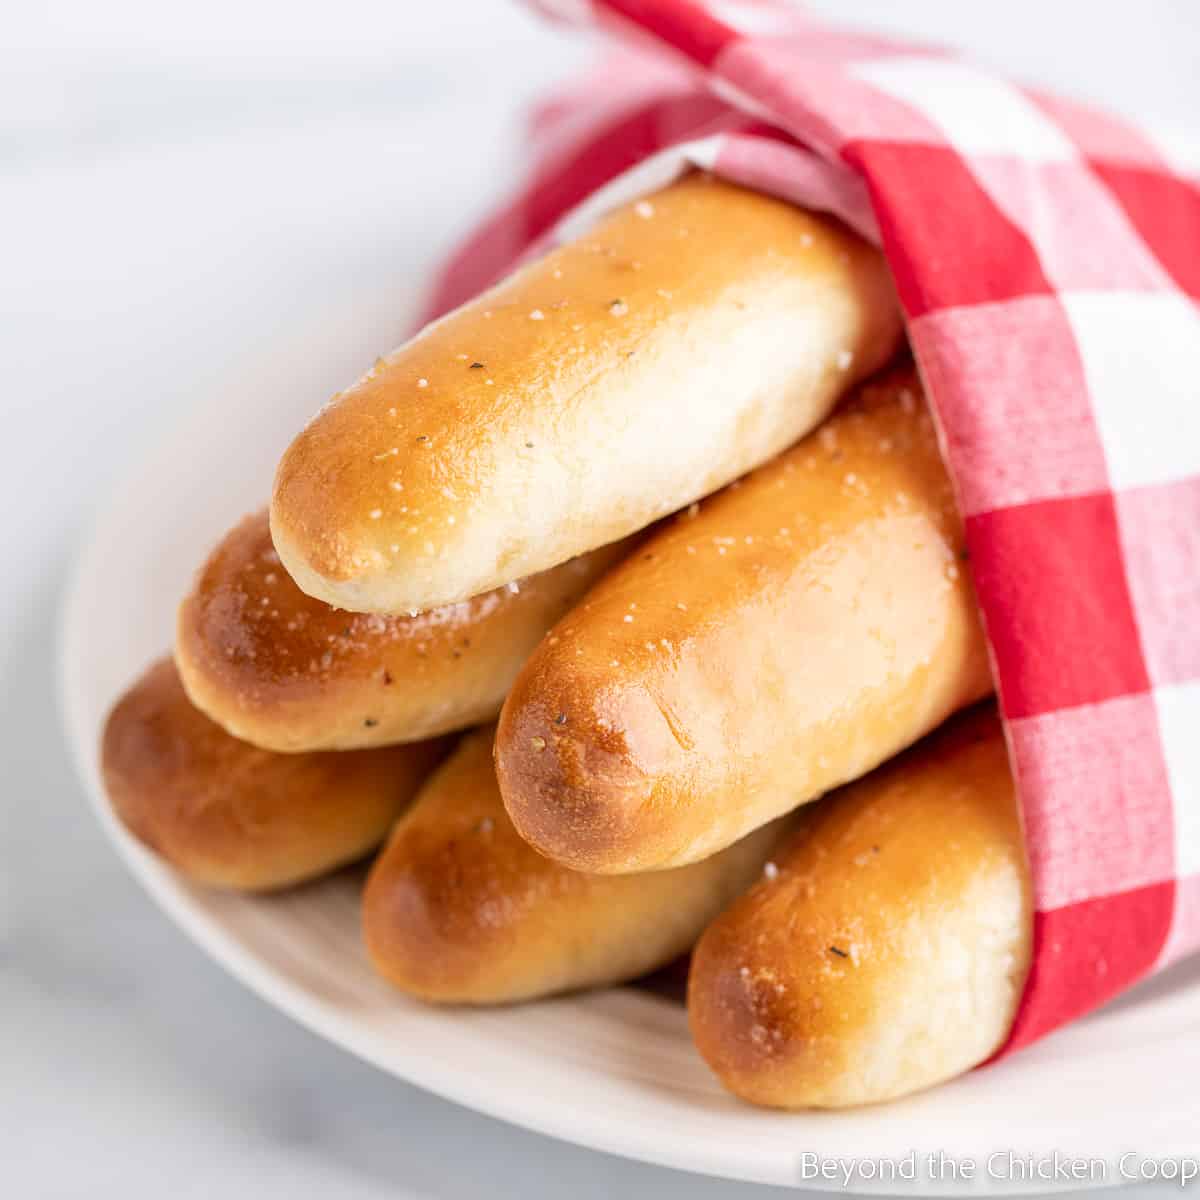 A bundle of breadsticks wrapped in a red and white napkin.